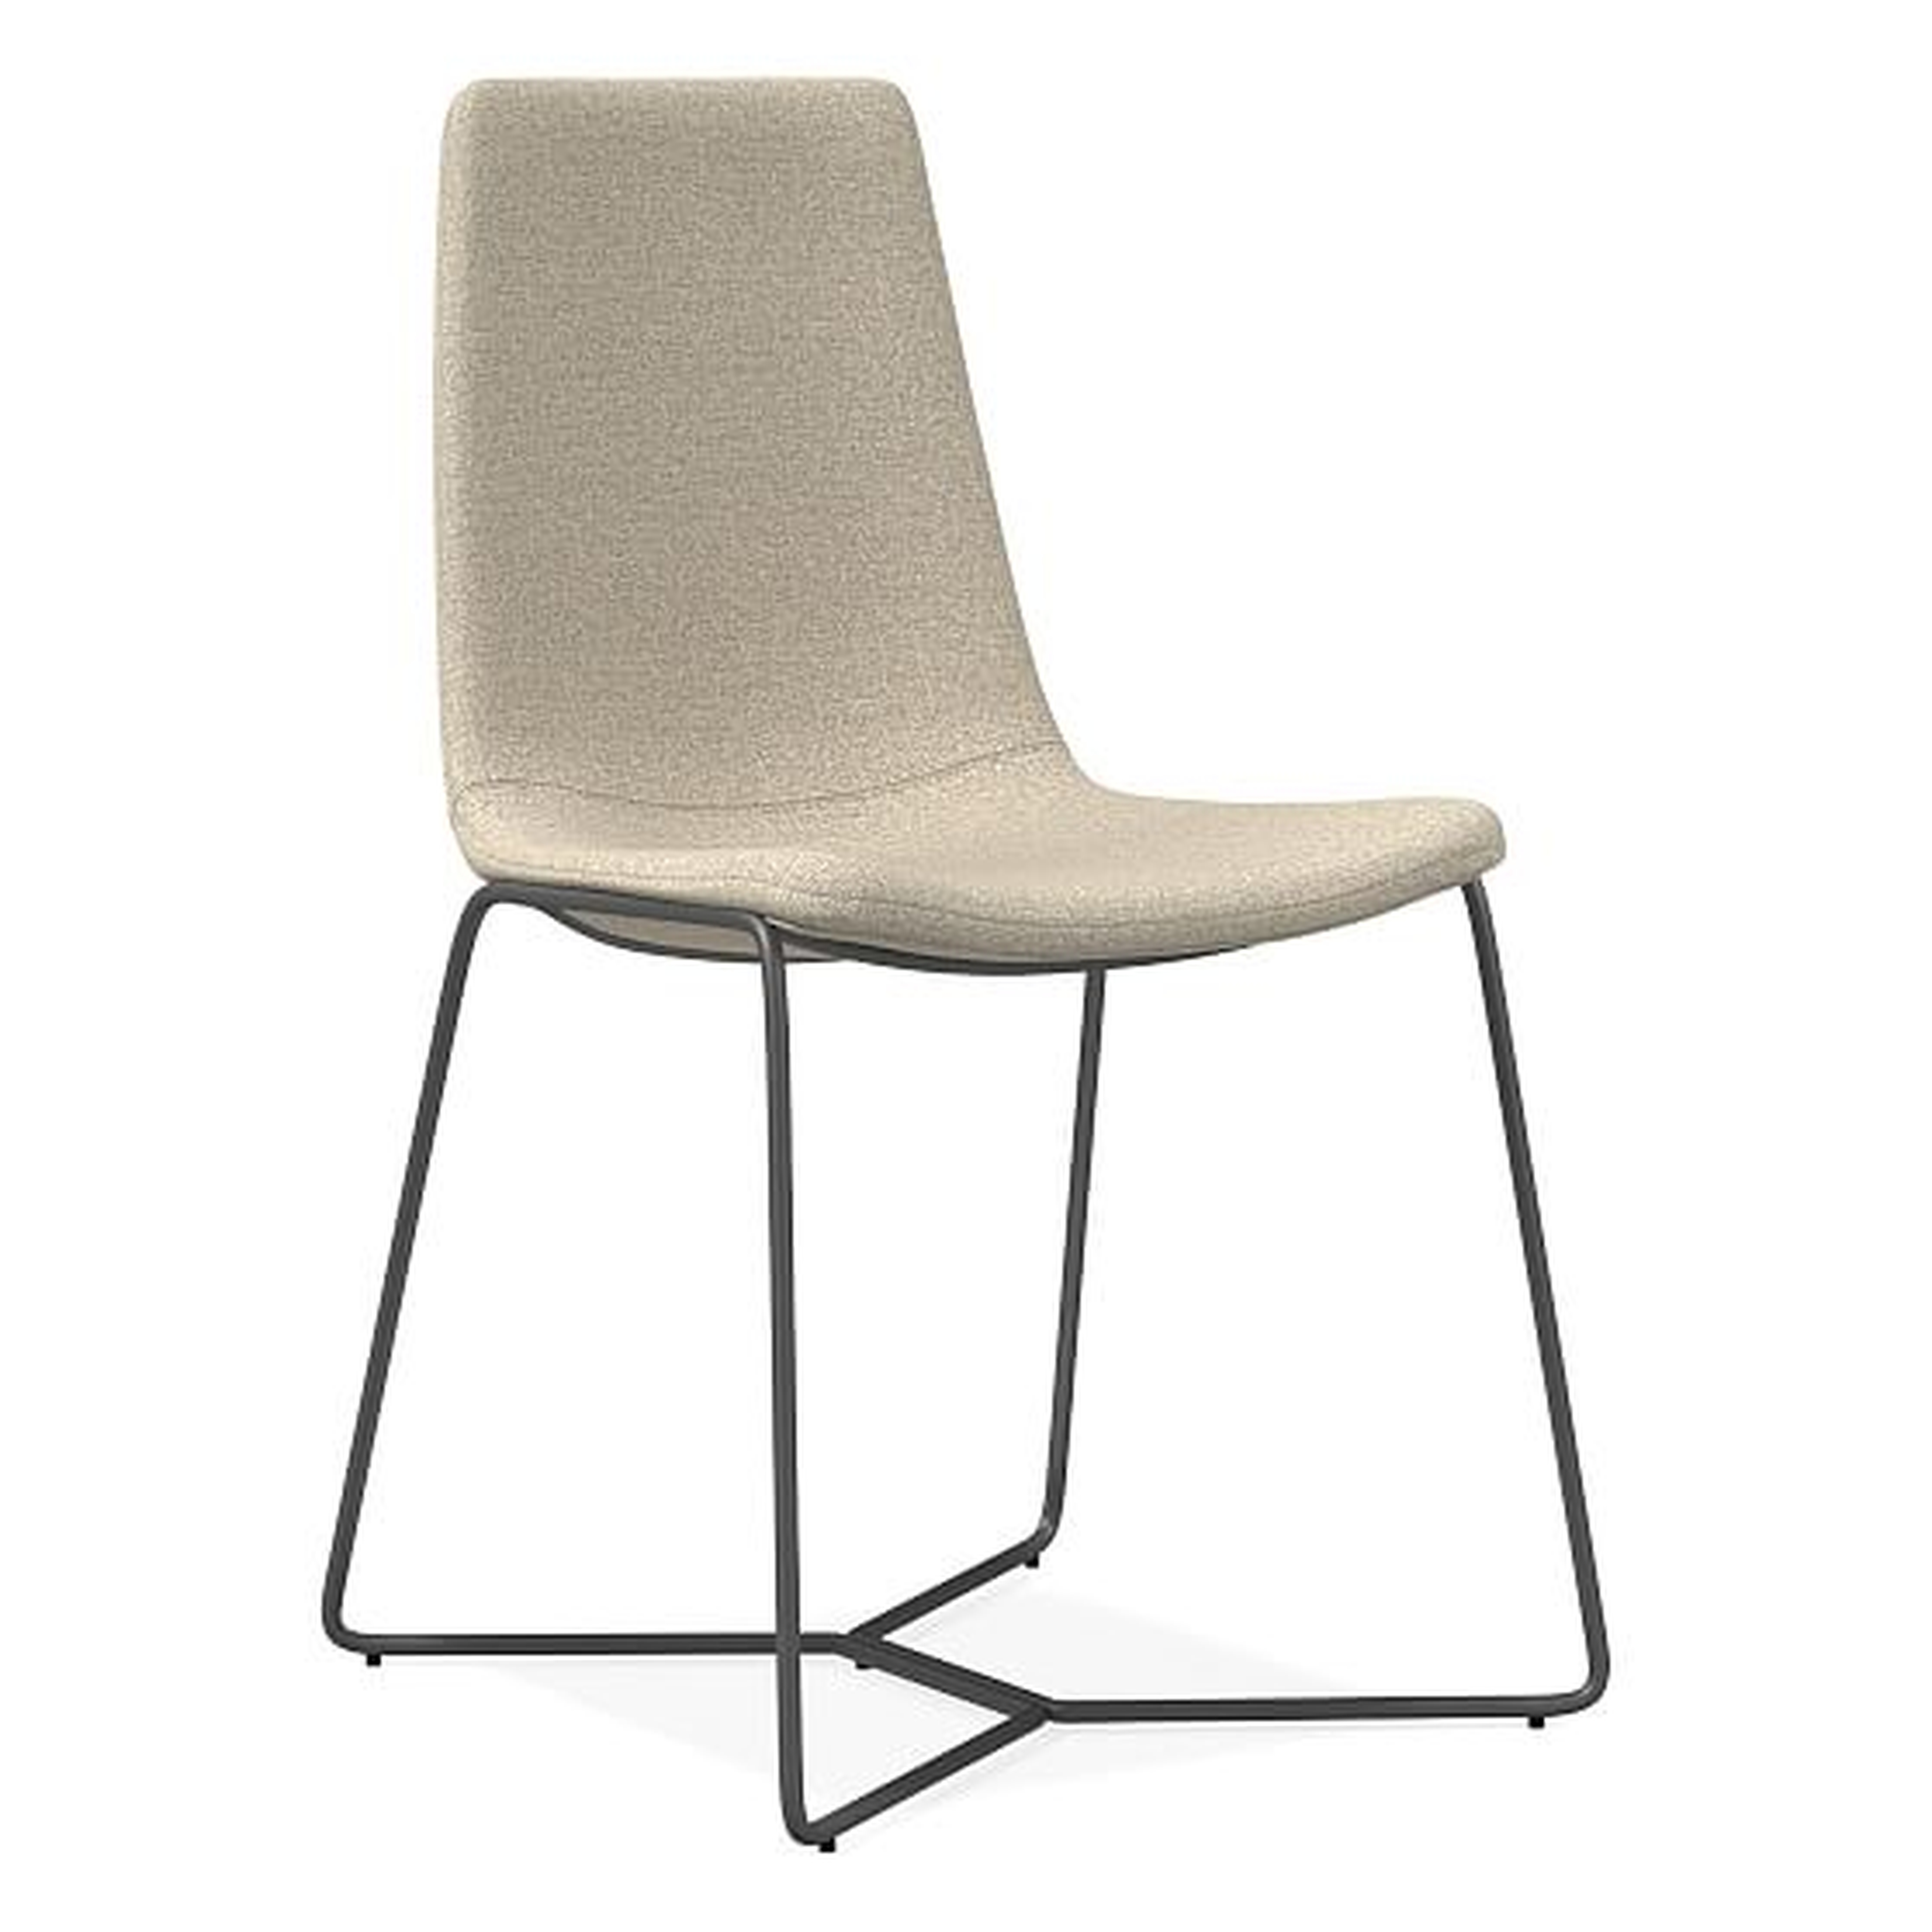 Slope Dining Chair, Chenille Tweed, Silver Gray Charcoal - West Elm